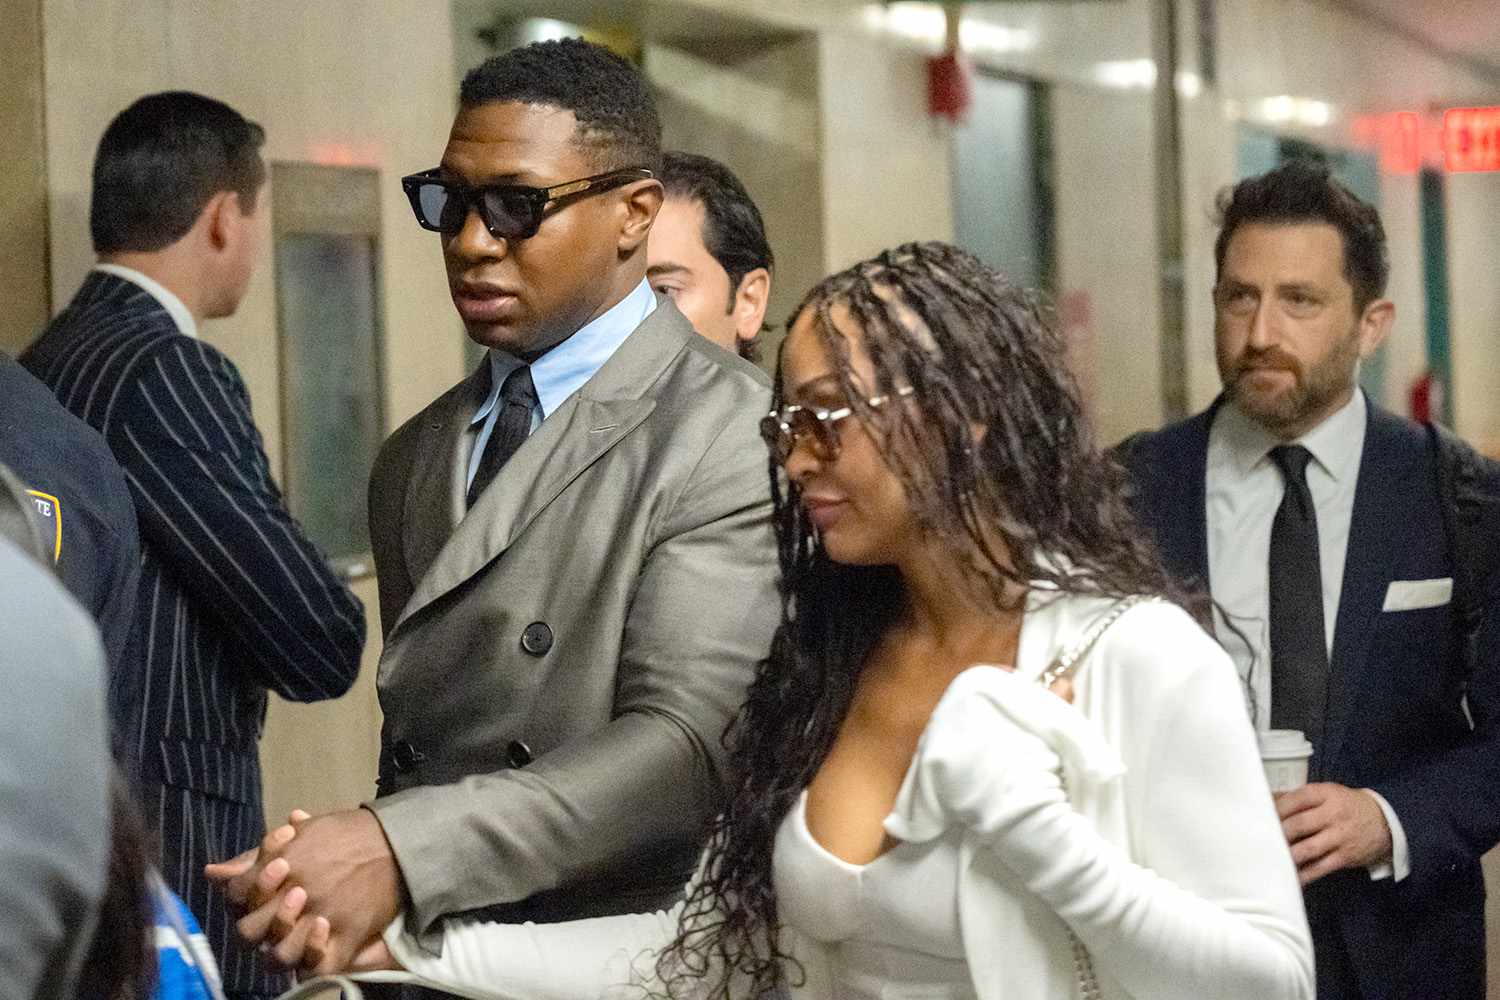 jonathan-majors-and-meagan-good-spotted-cuddling-in-nyc-ahead-of-trial